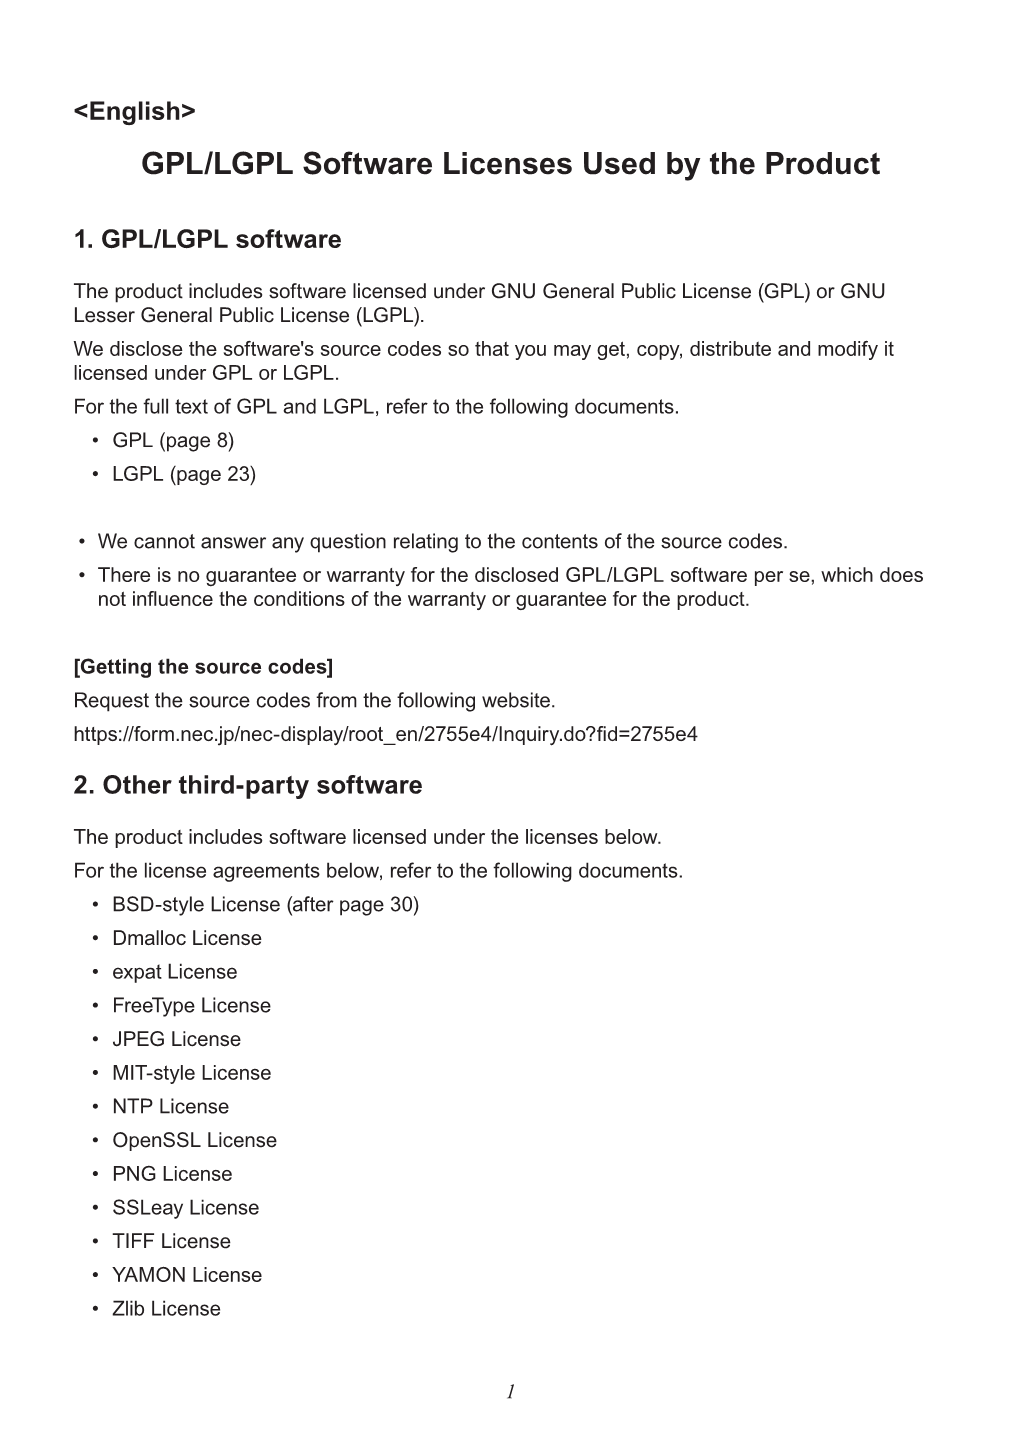 GPL/LGPL Software Licenses Used by the Product